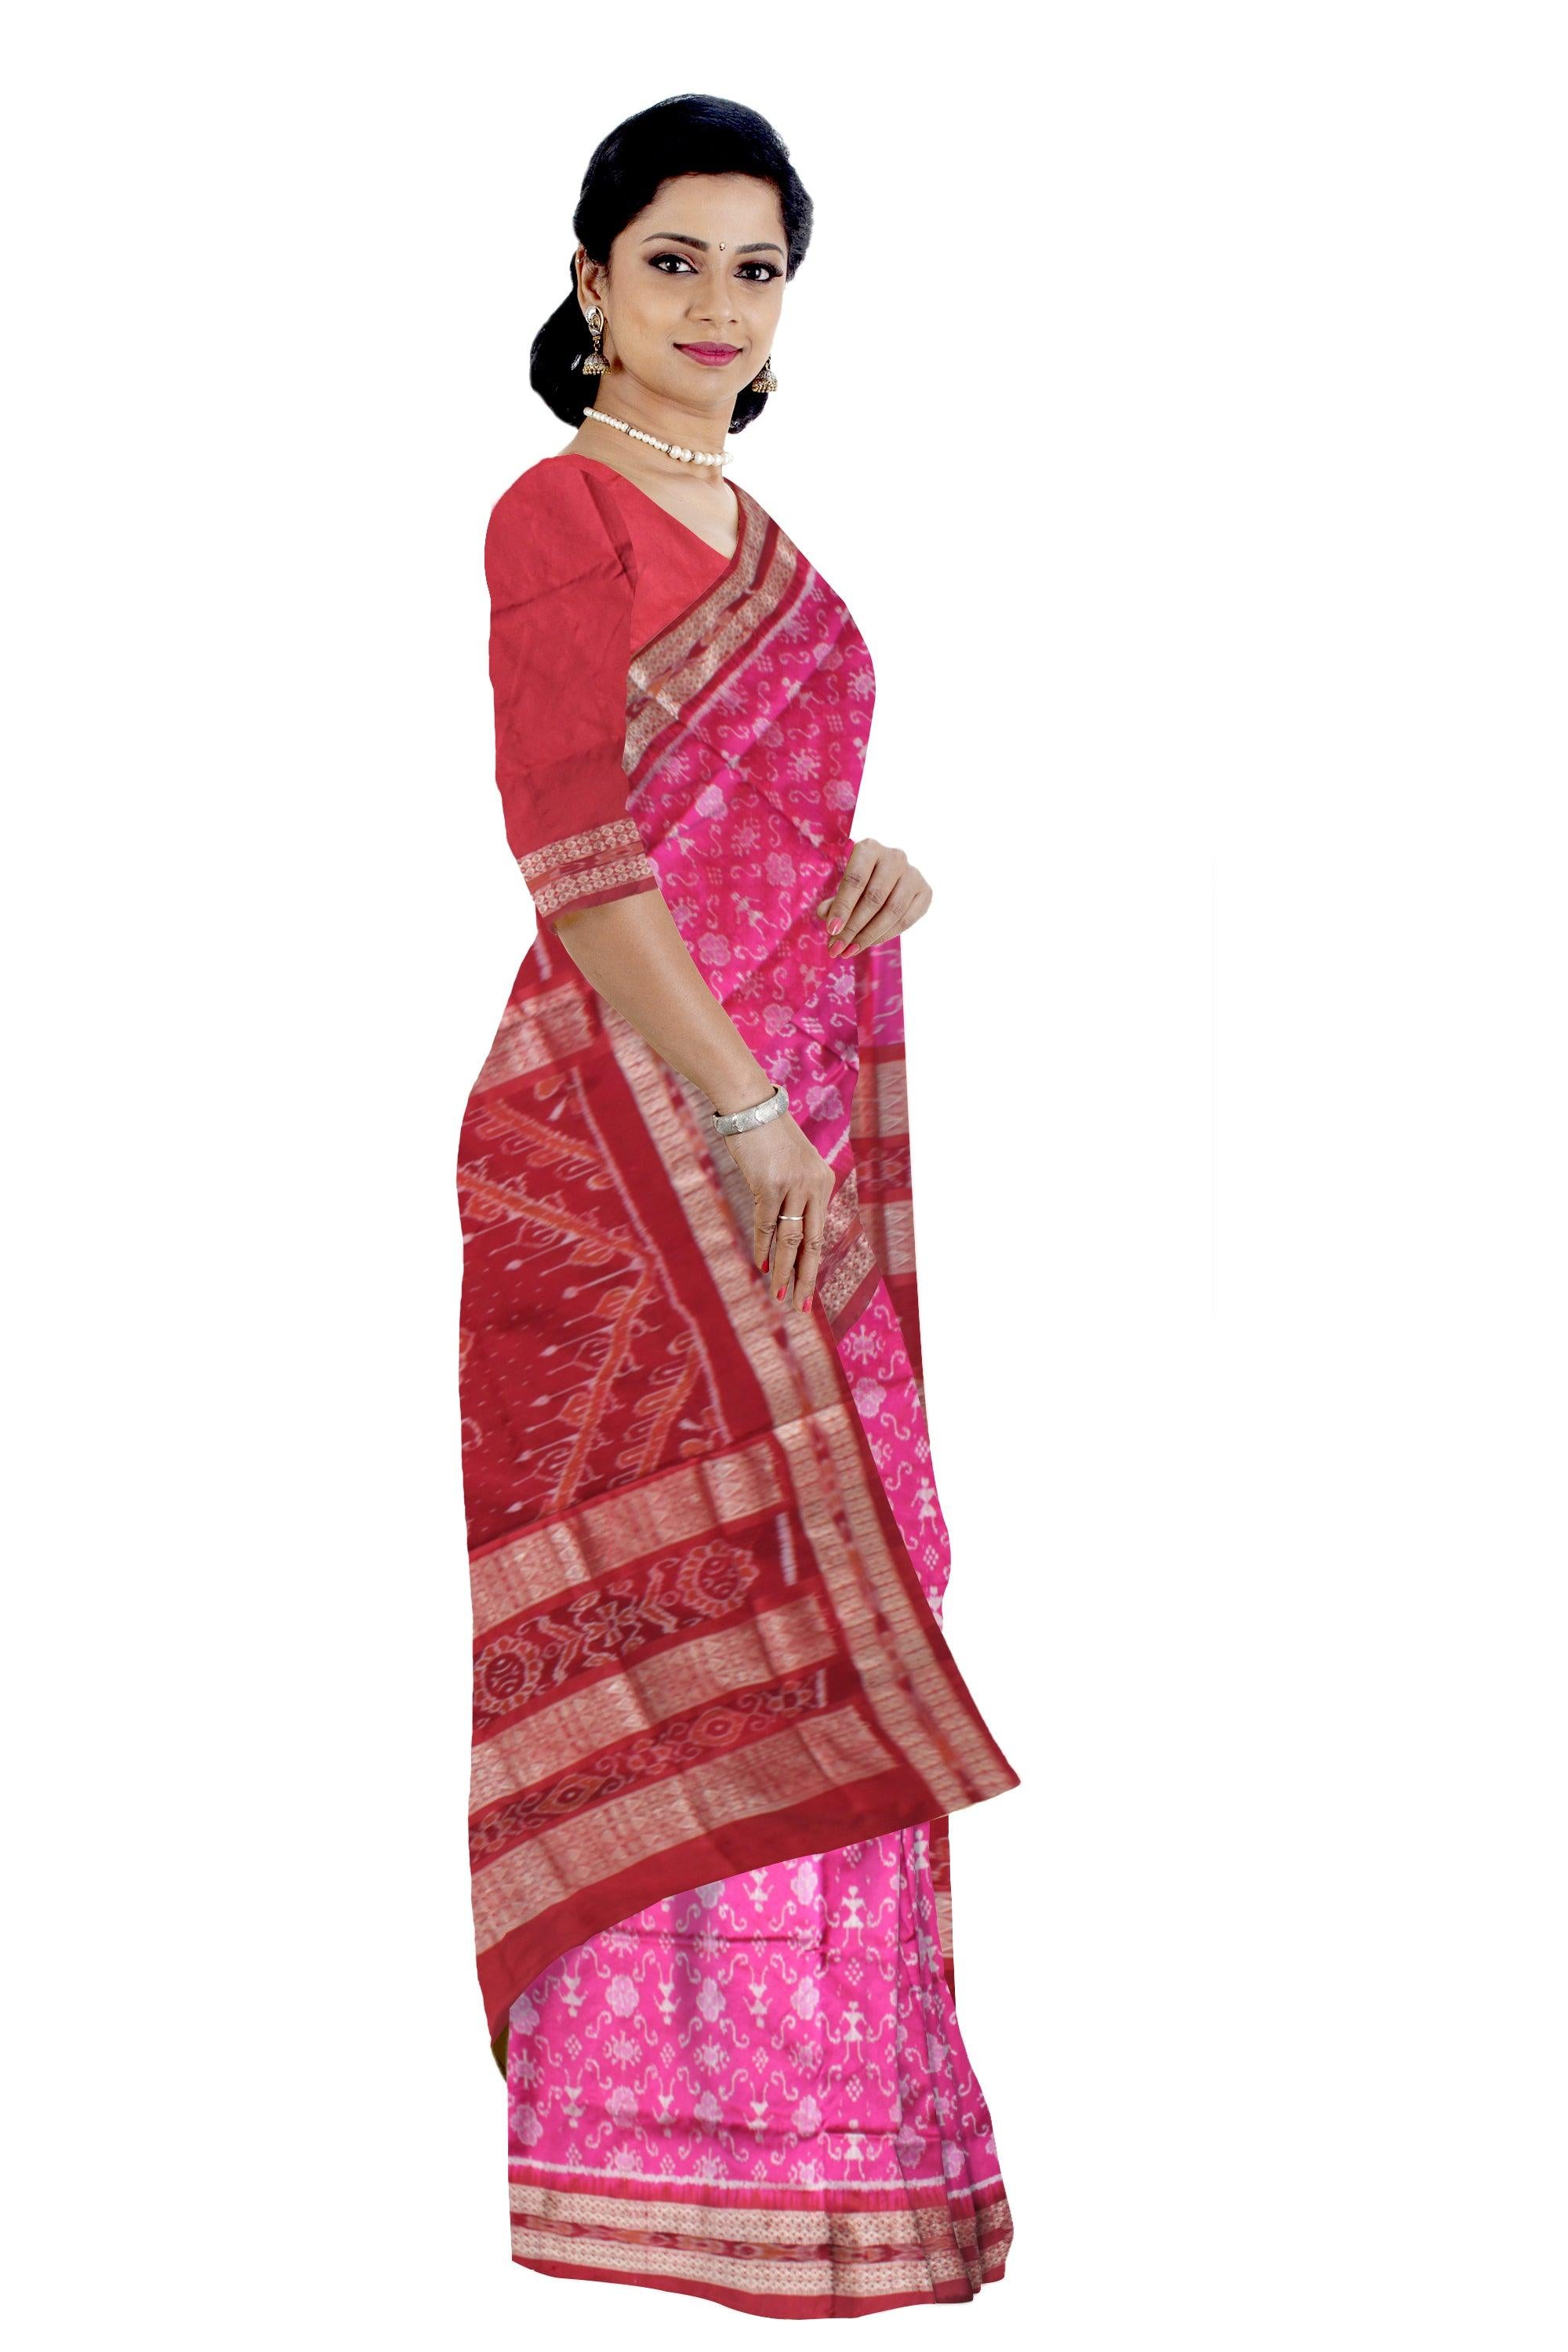 TERRACOTTA  PATTERN SILK SAREE IS RANI AND MAROON COLOR BASE, AVAILABLE WITH MATCHING BLOUSE PIECE. - Koshali Arts & Crafts Enterprise